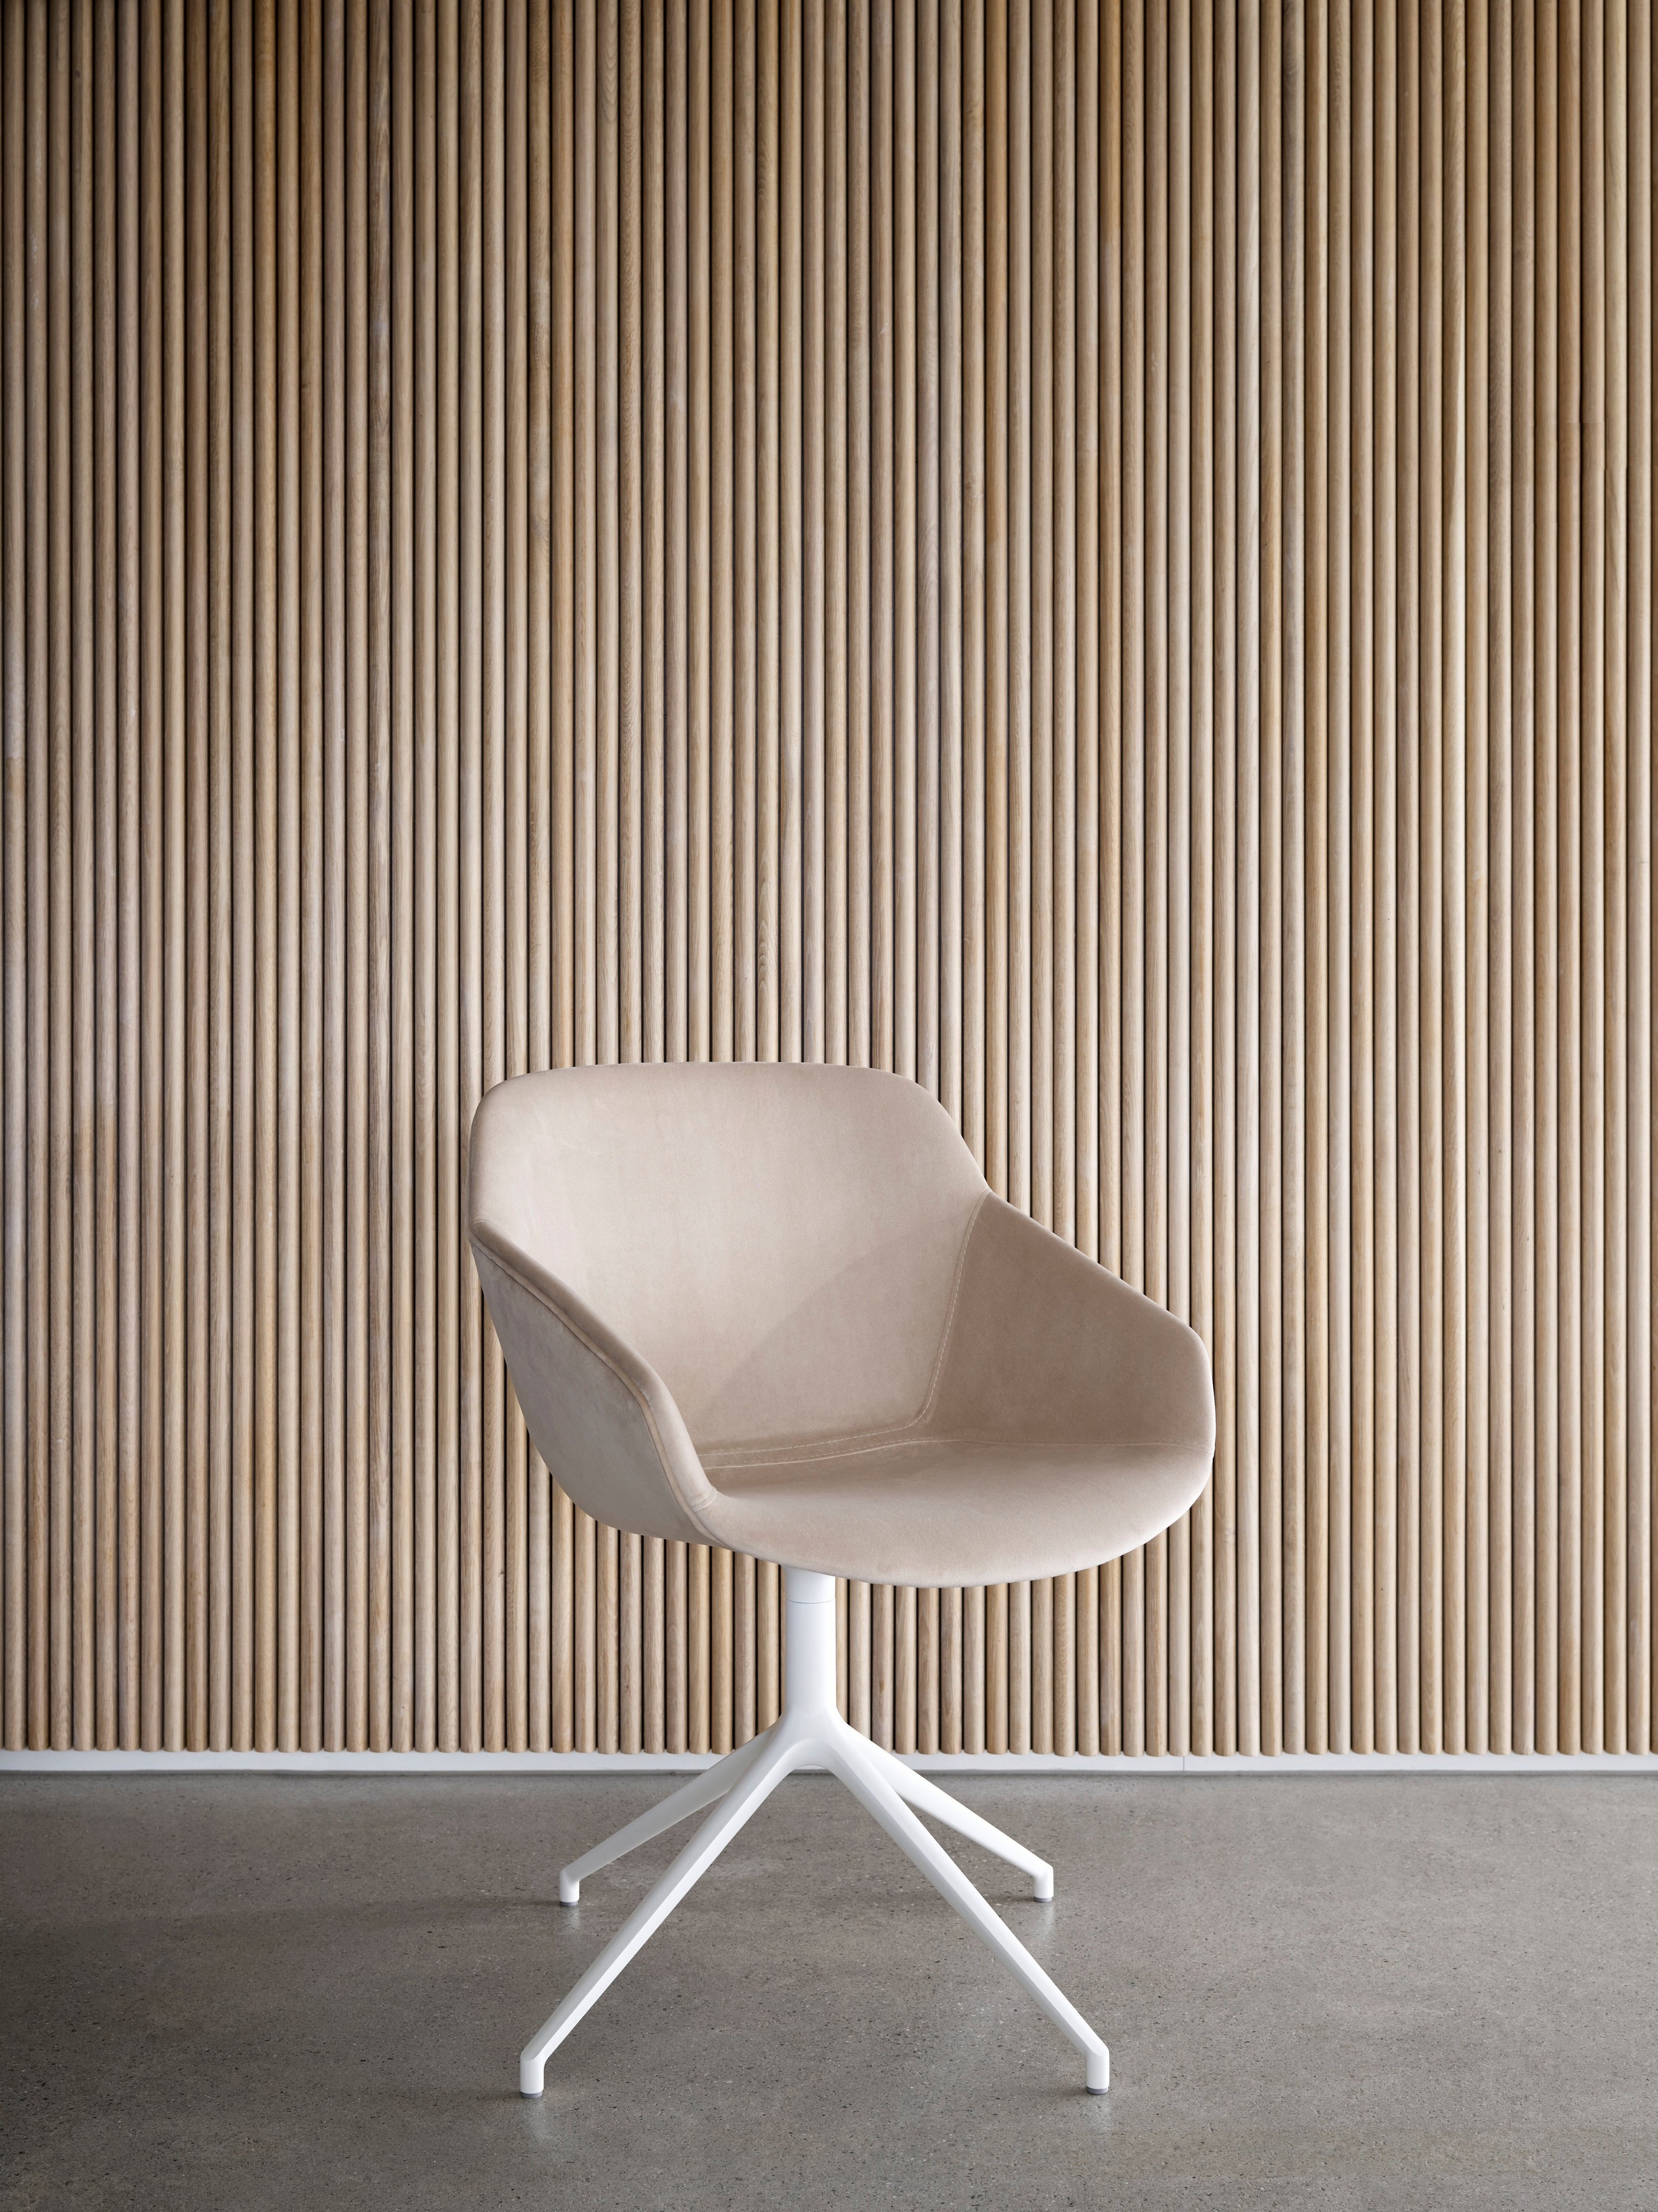 Beige chair with white base against a vertical wooden slat wall.